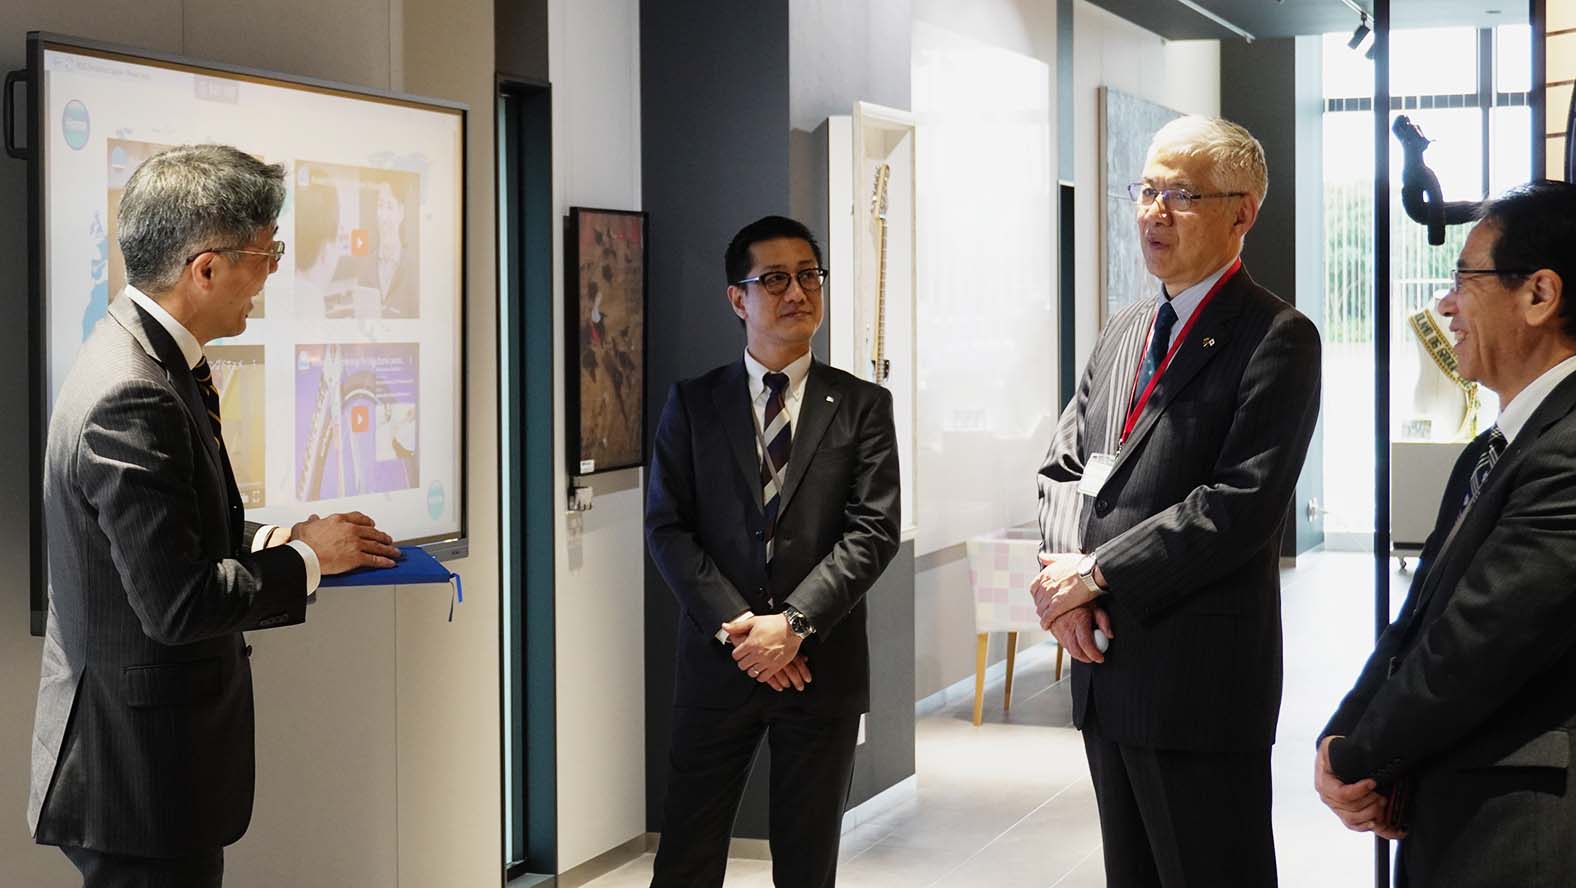 Ambassador from the Embassy of Japan in Lithuania Visits Roland DG Head Office